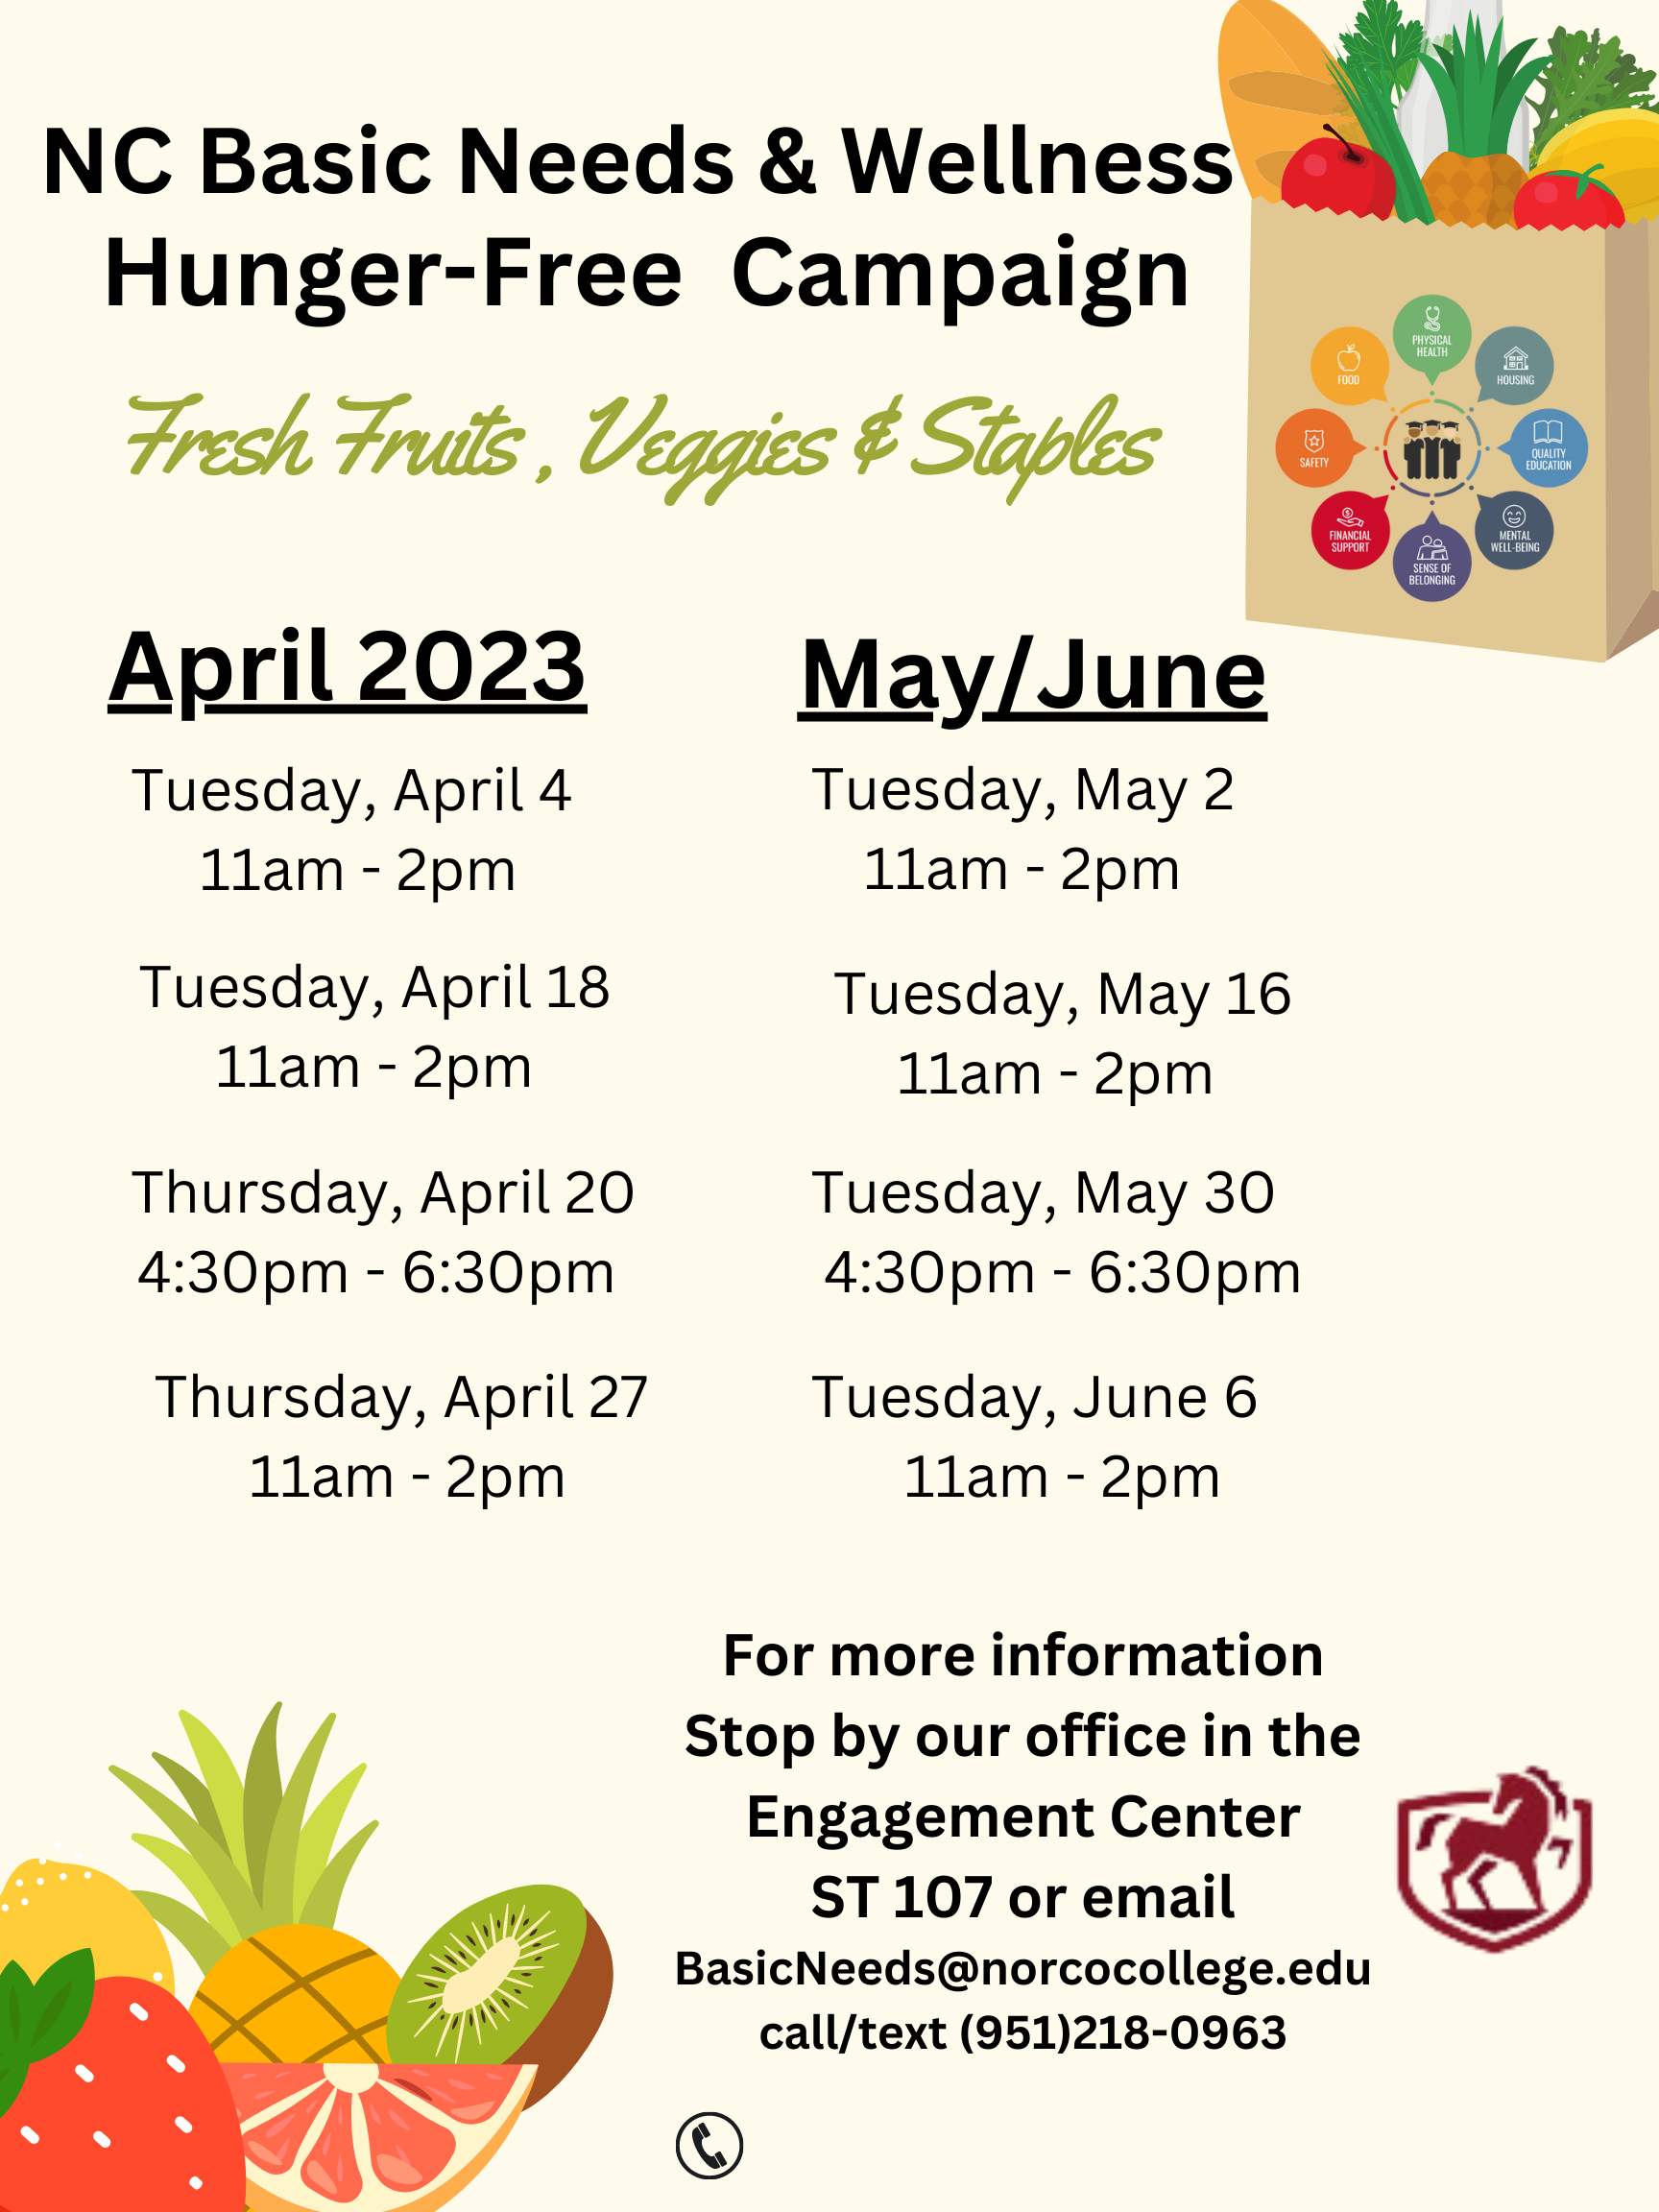 NC Basic Needs and Wellness Hunger-Free Campaign flyer